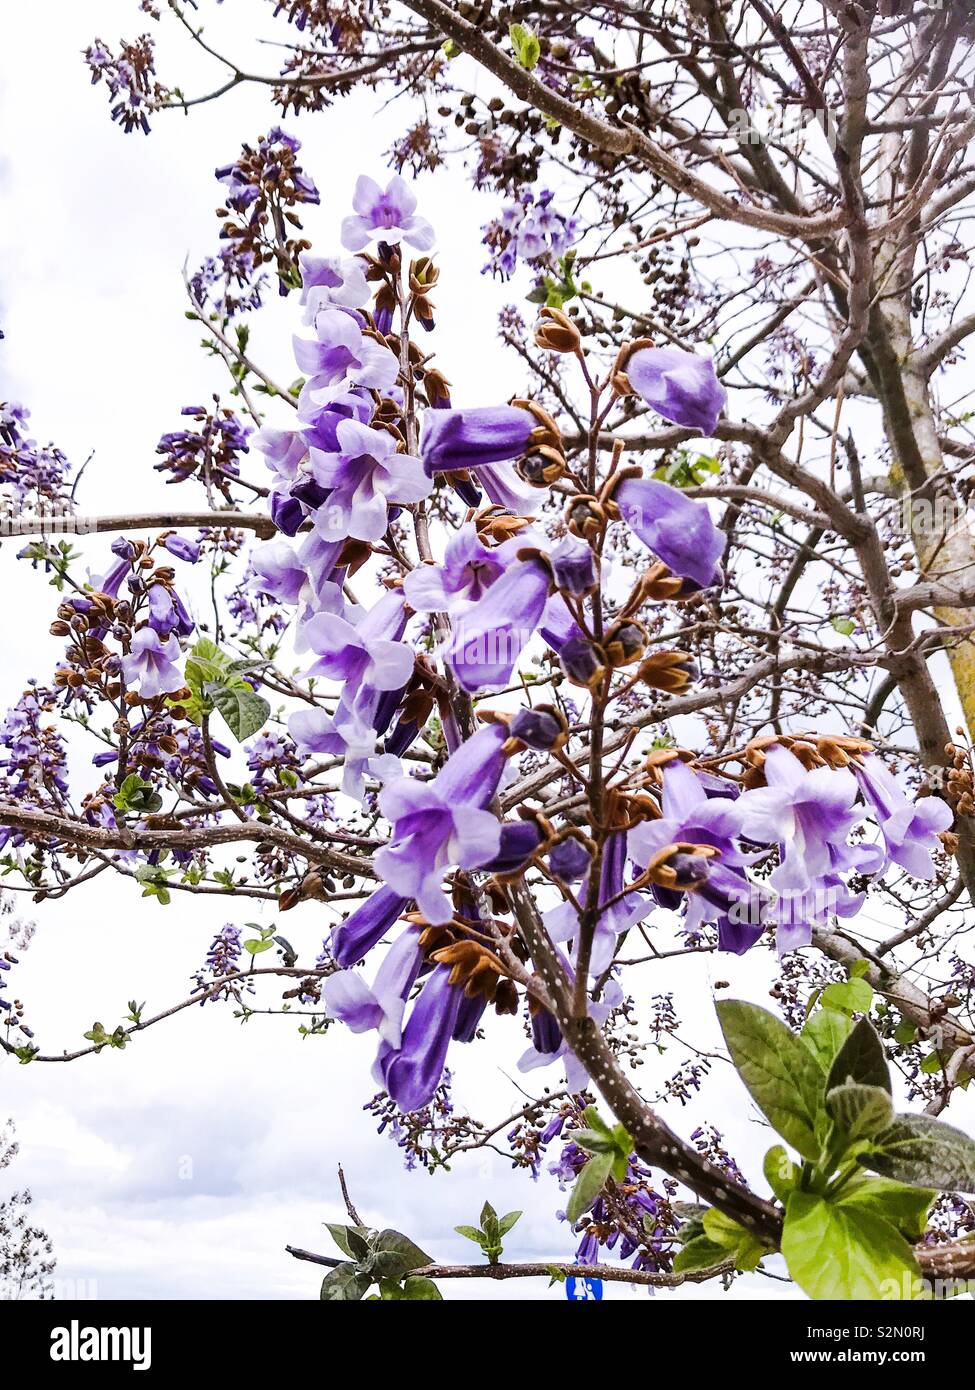 Paulownia tomentosa trees in flower, spring blossom Stock Photo - Alamy